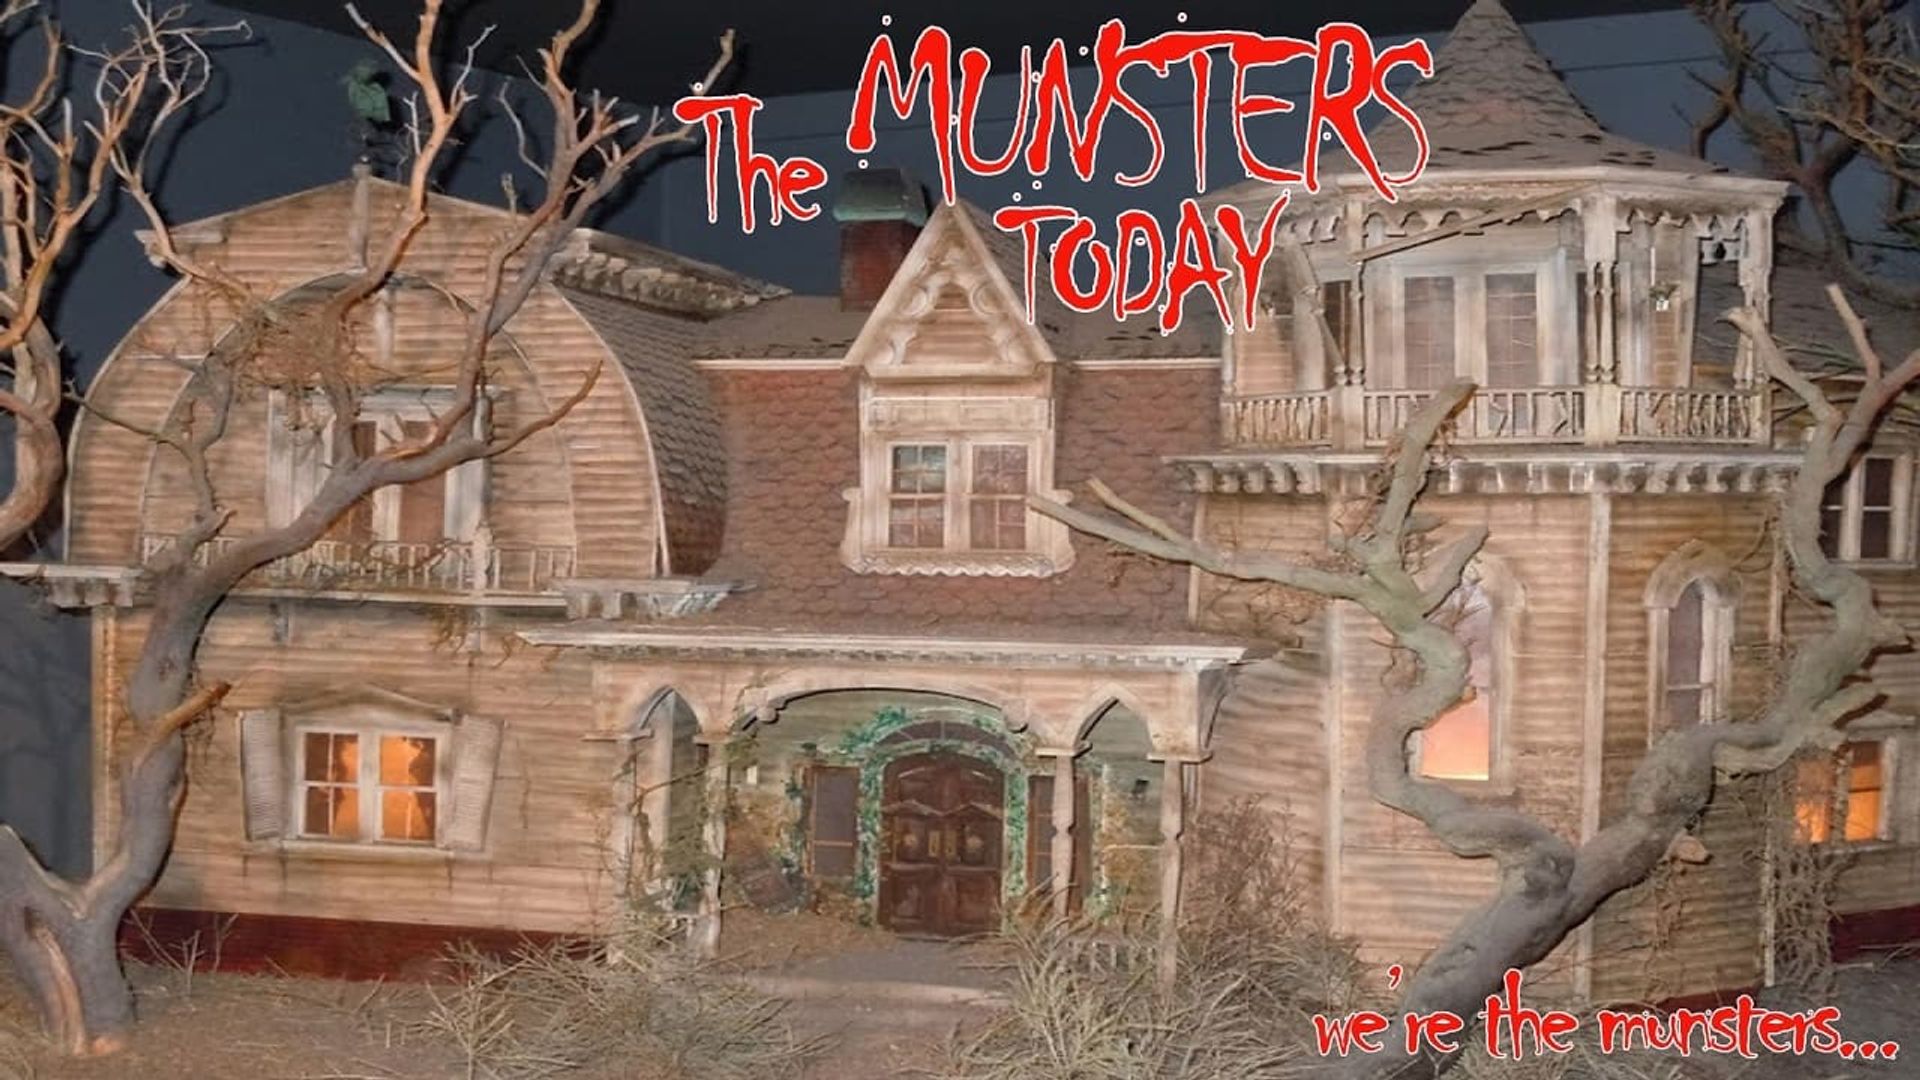 The Munsters Today background